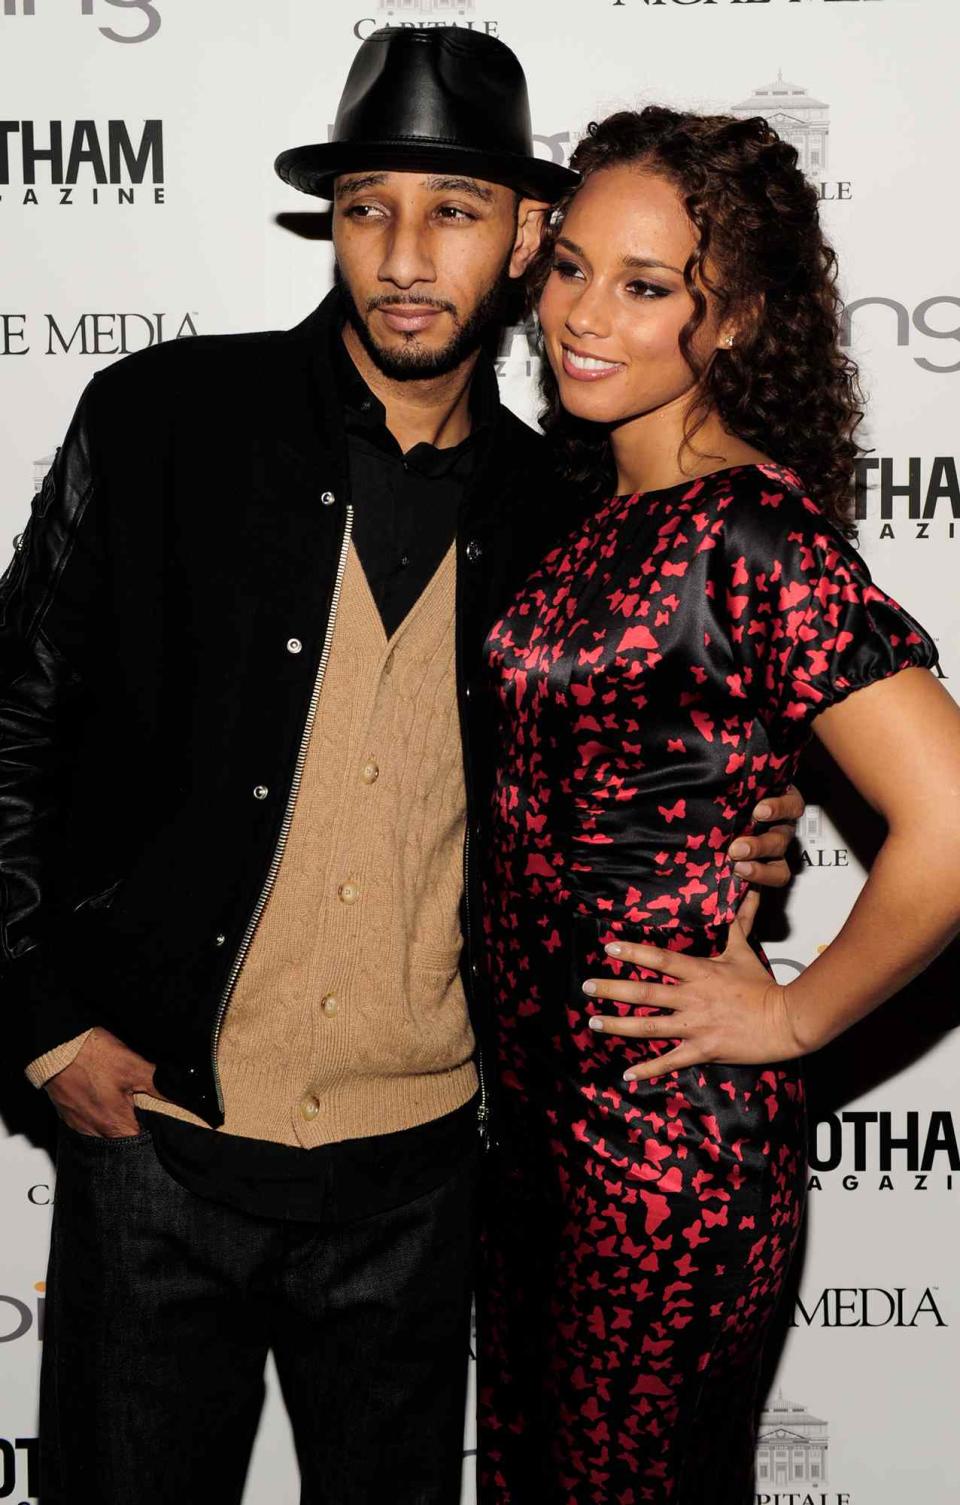 Swizz Beatz and Alicia Keys attend ALICIA KEYS Hosts GOTHAM MAGAZINES Annual Gala Presented by BING at Capitale on March 15, 2010 in New York City